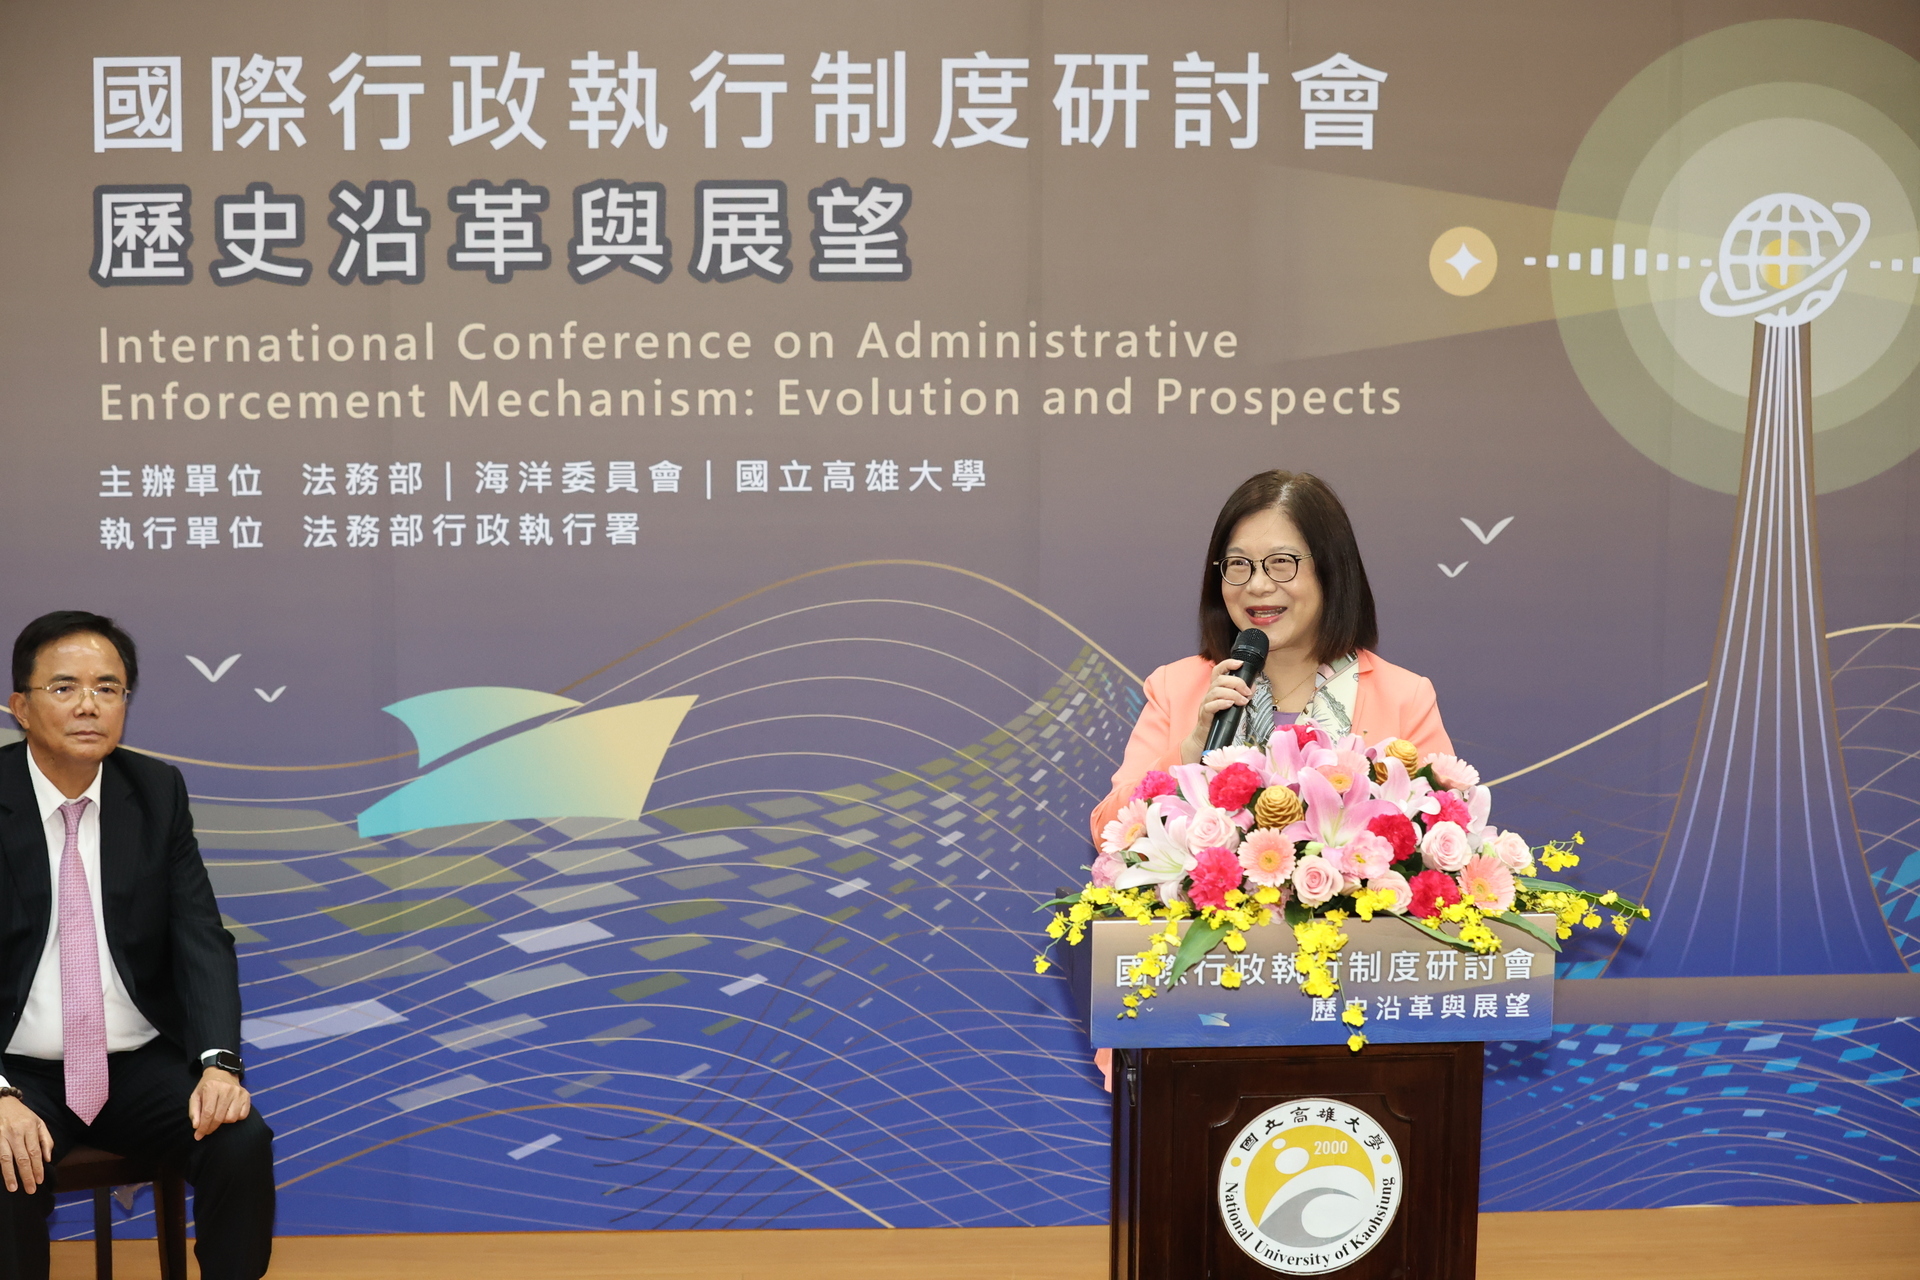 Chairperson Kuan Bi-ling of the Ocean Affairs Council delivers a speech.